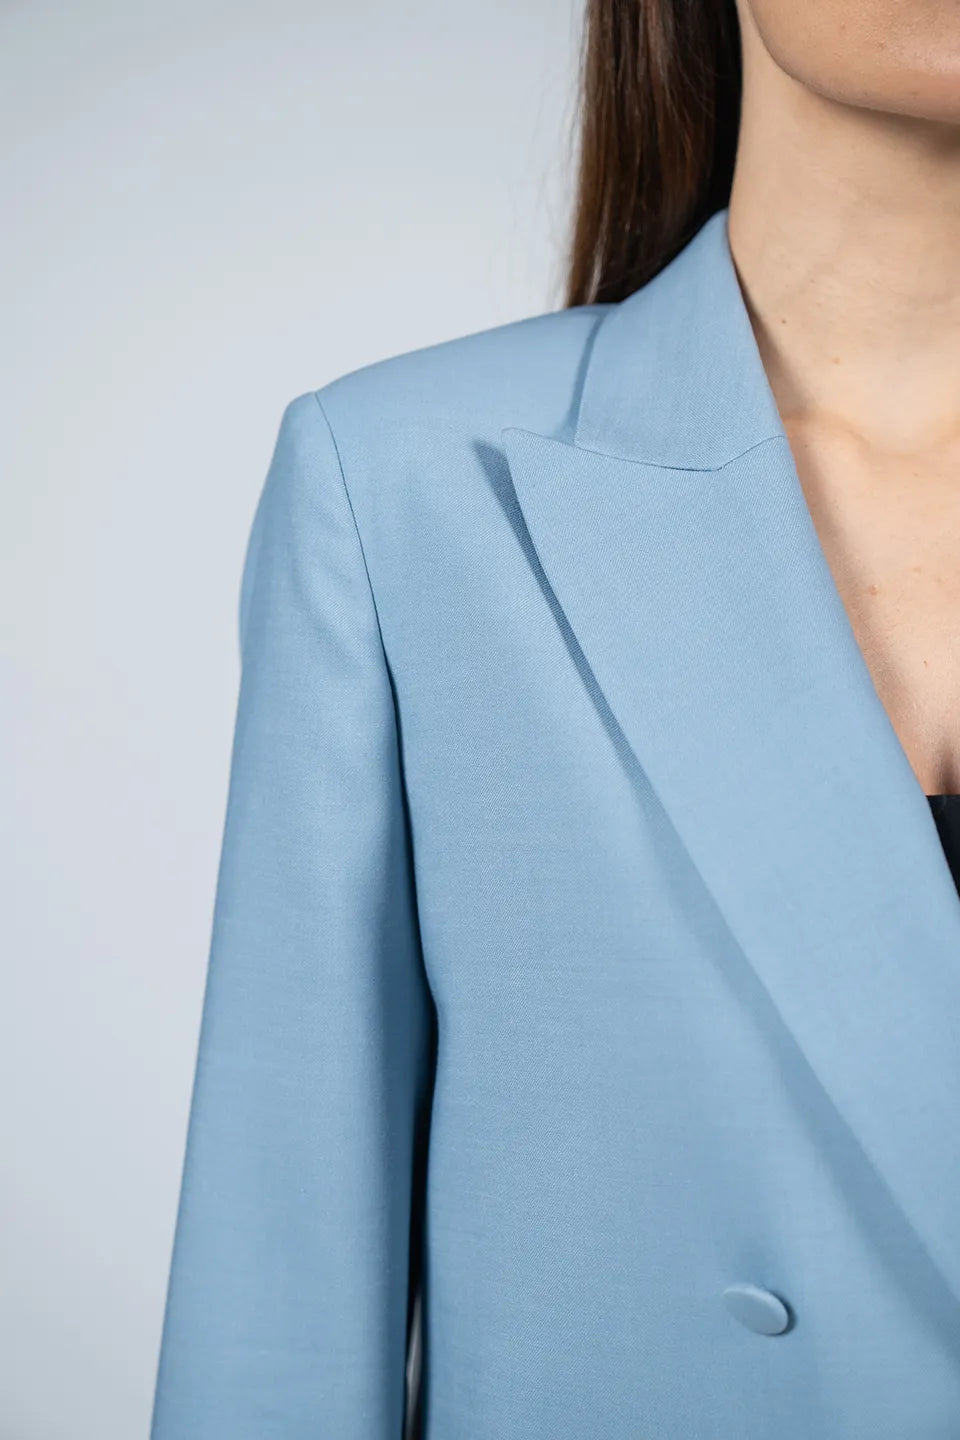 Designer Blue Women blazers, Jacket, shop online with free delivery in UAE. Product gallery 8